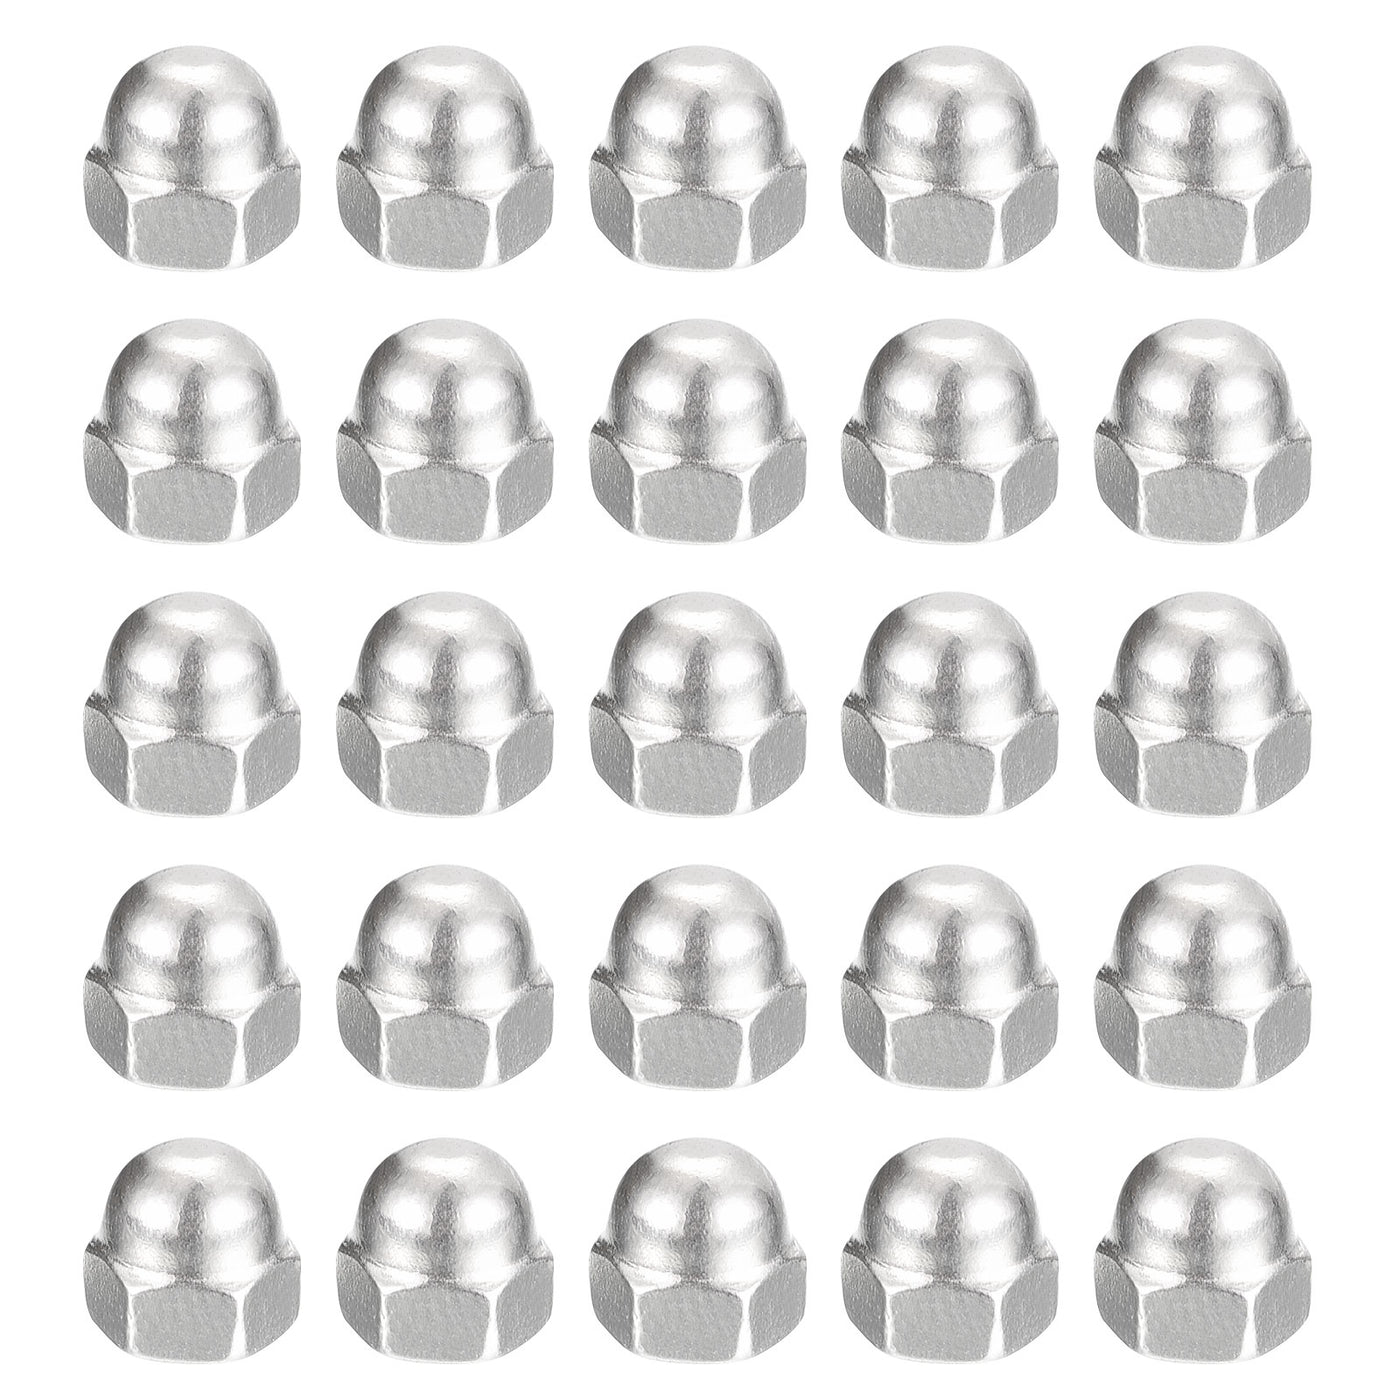 uxcell Uxcell #6-32 Acorn Cap Nuts,100pcs - 304 Stainless Steel Hardware Nuts, Acorn Hex Cap Dome Head Nuts for Fasteners (Silver)